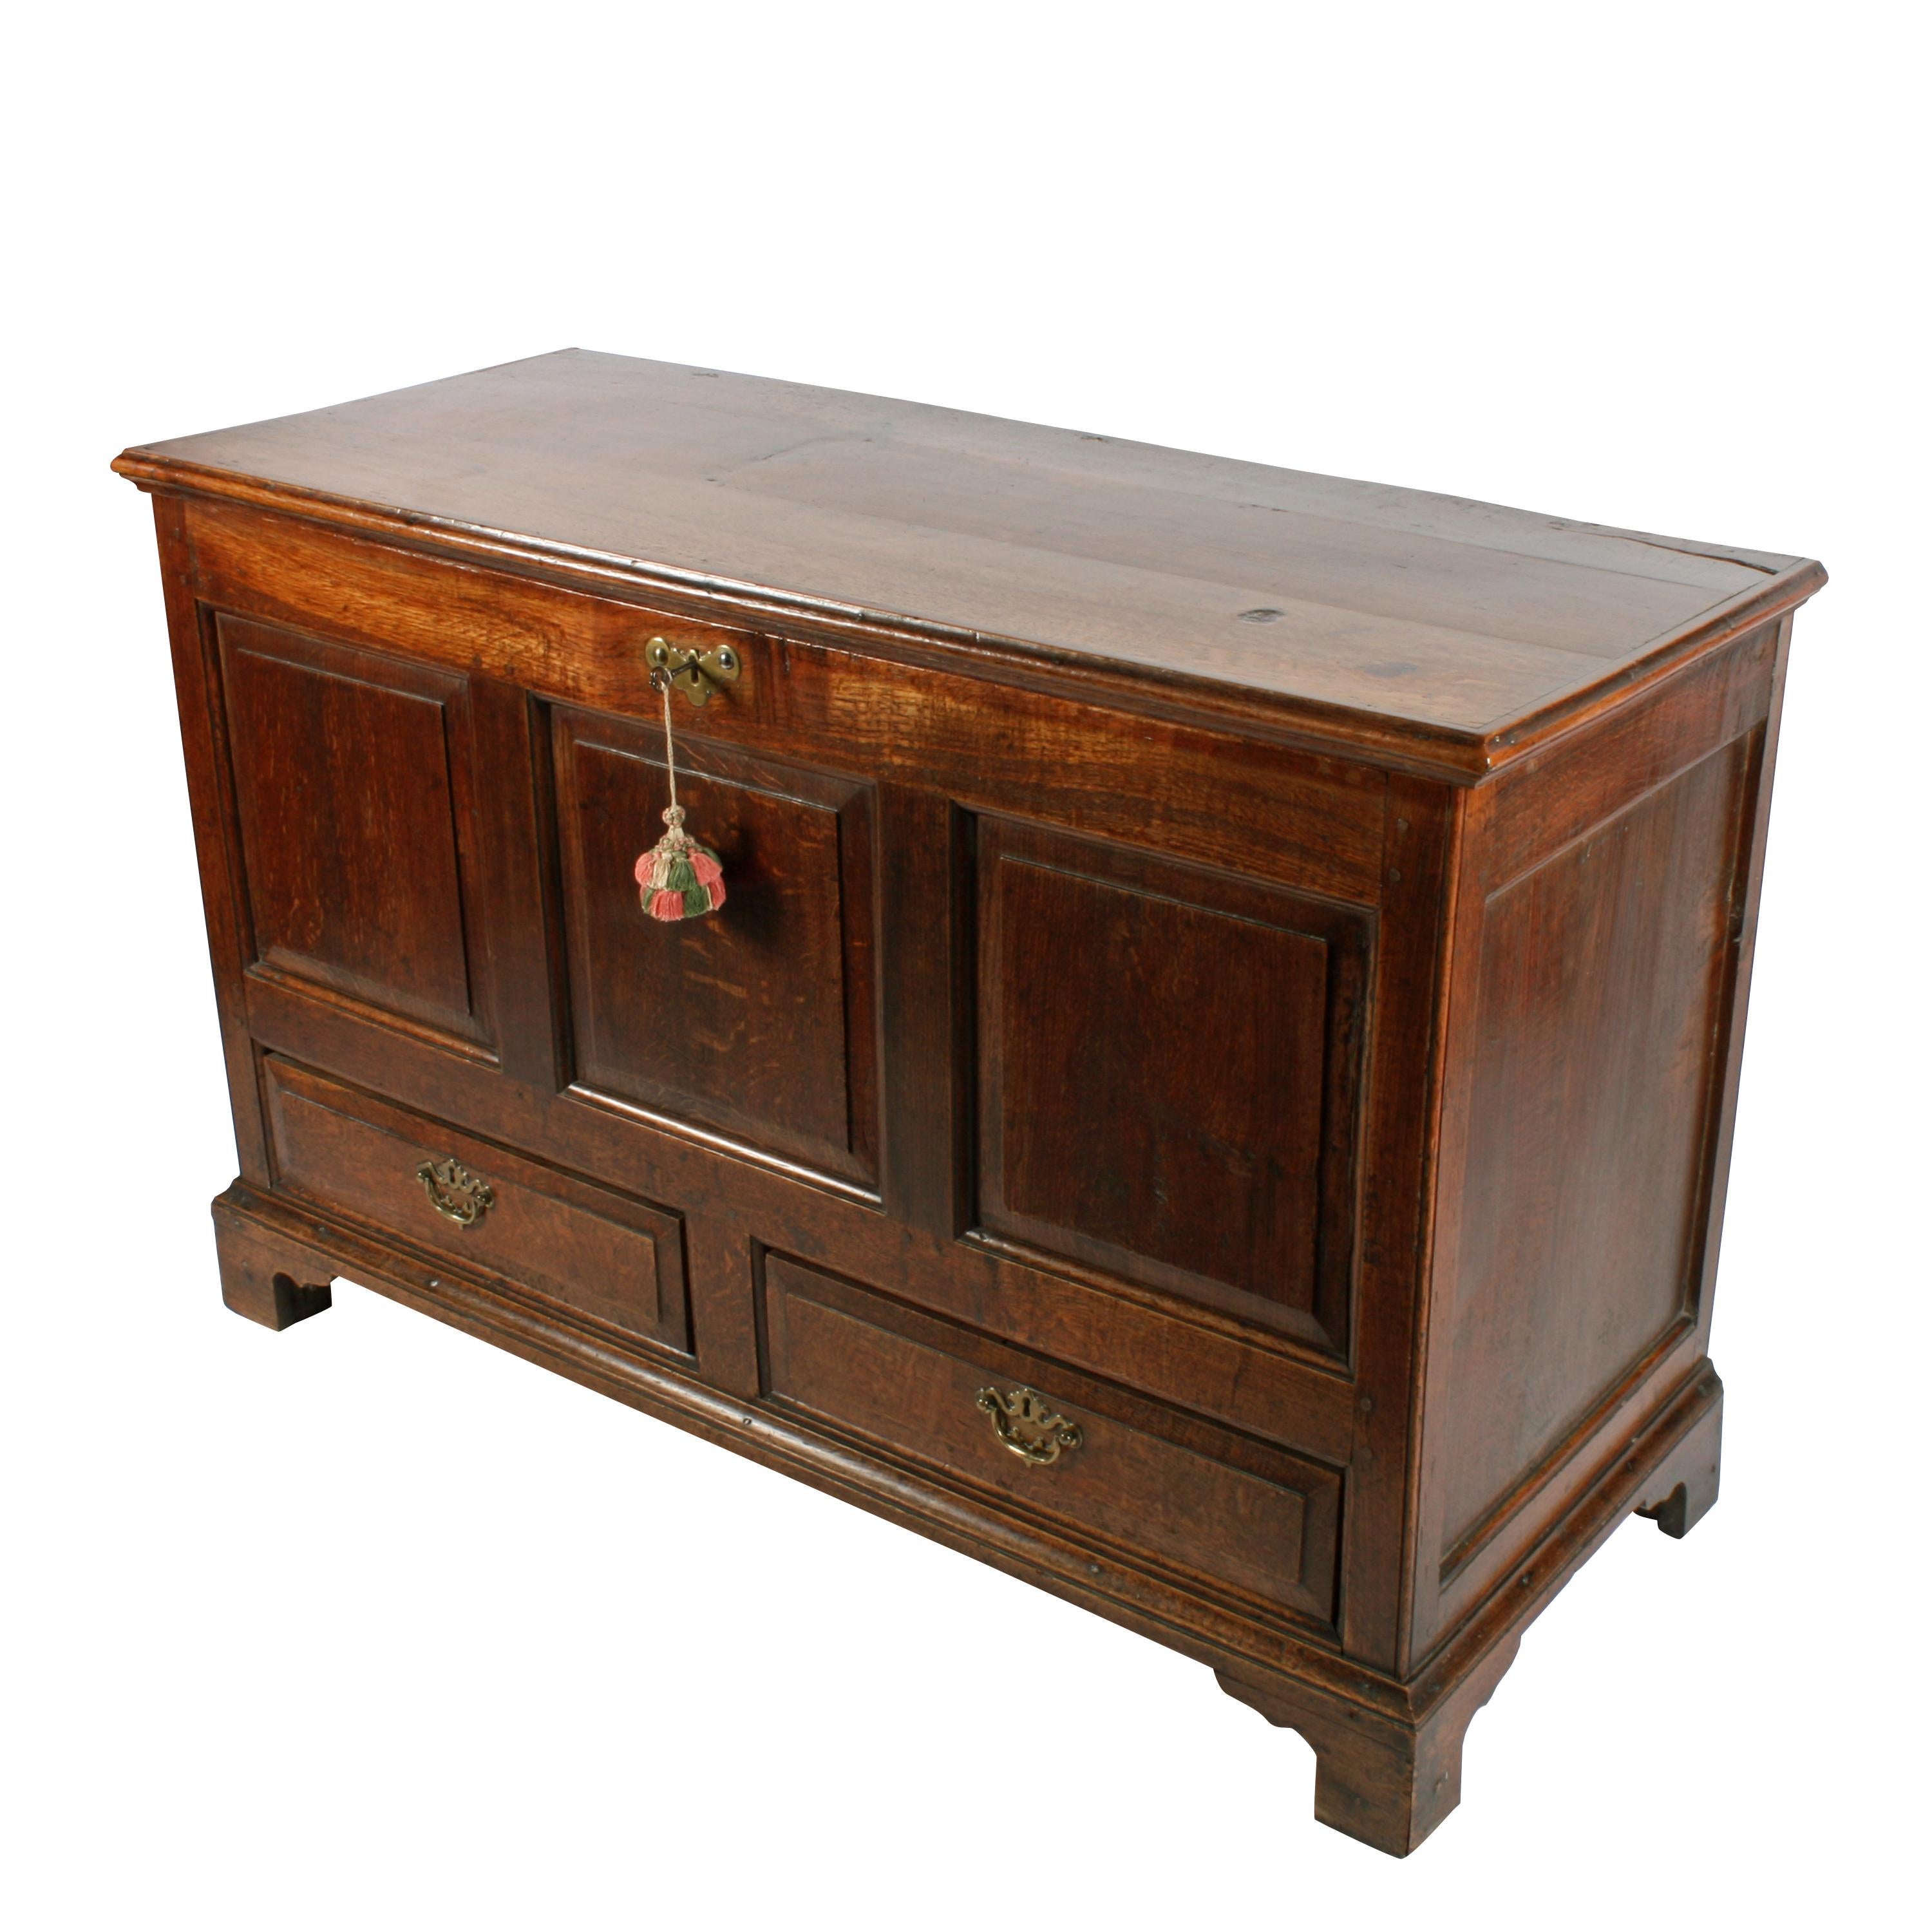 An 18th century George II oak mule or dower chest.

The chest has a hinged lid, three recessed fielded panels to the front and two drawers with fielded fronts to match.

The drawers are oak lined and have original brass handles and steel